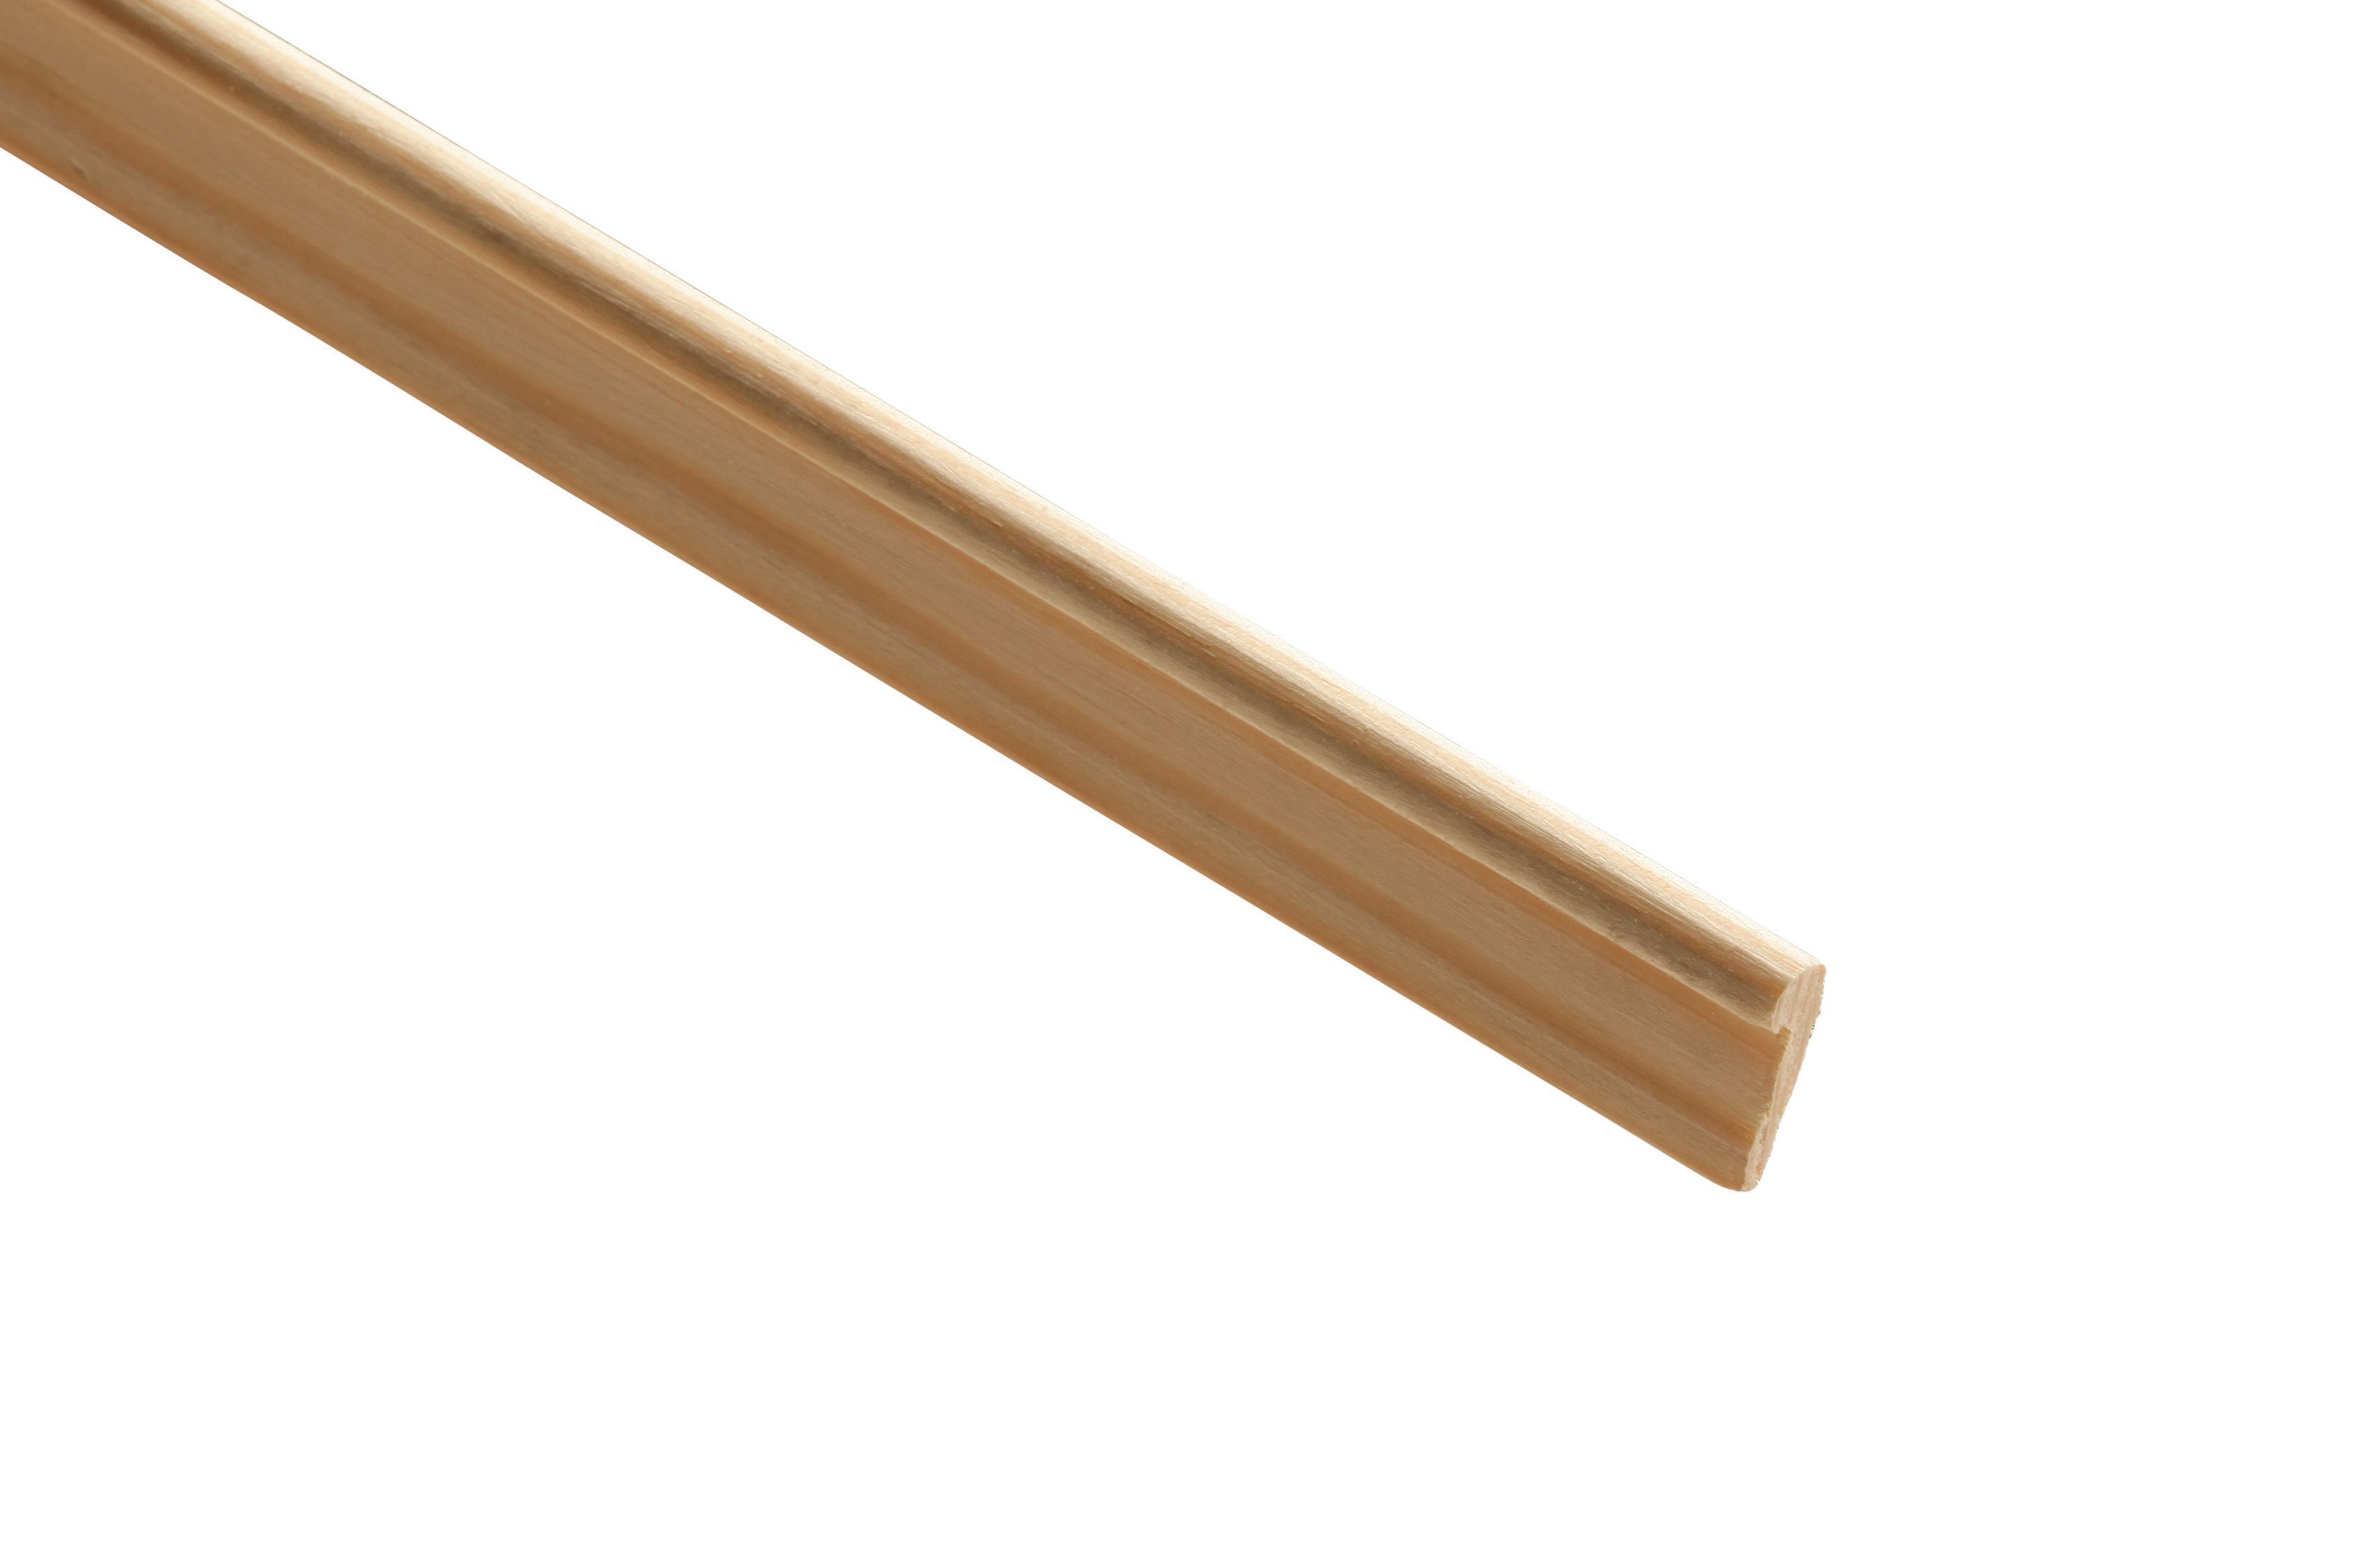 Image of Wickes Pine Hockey Stick Moulding - 20 x 8 x 2400mm